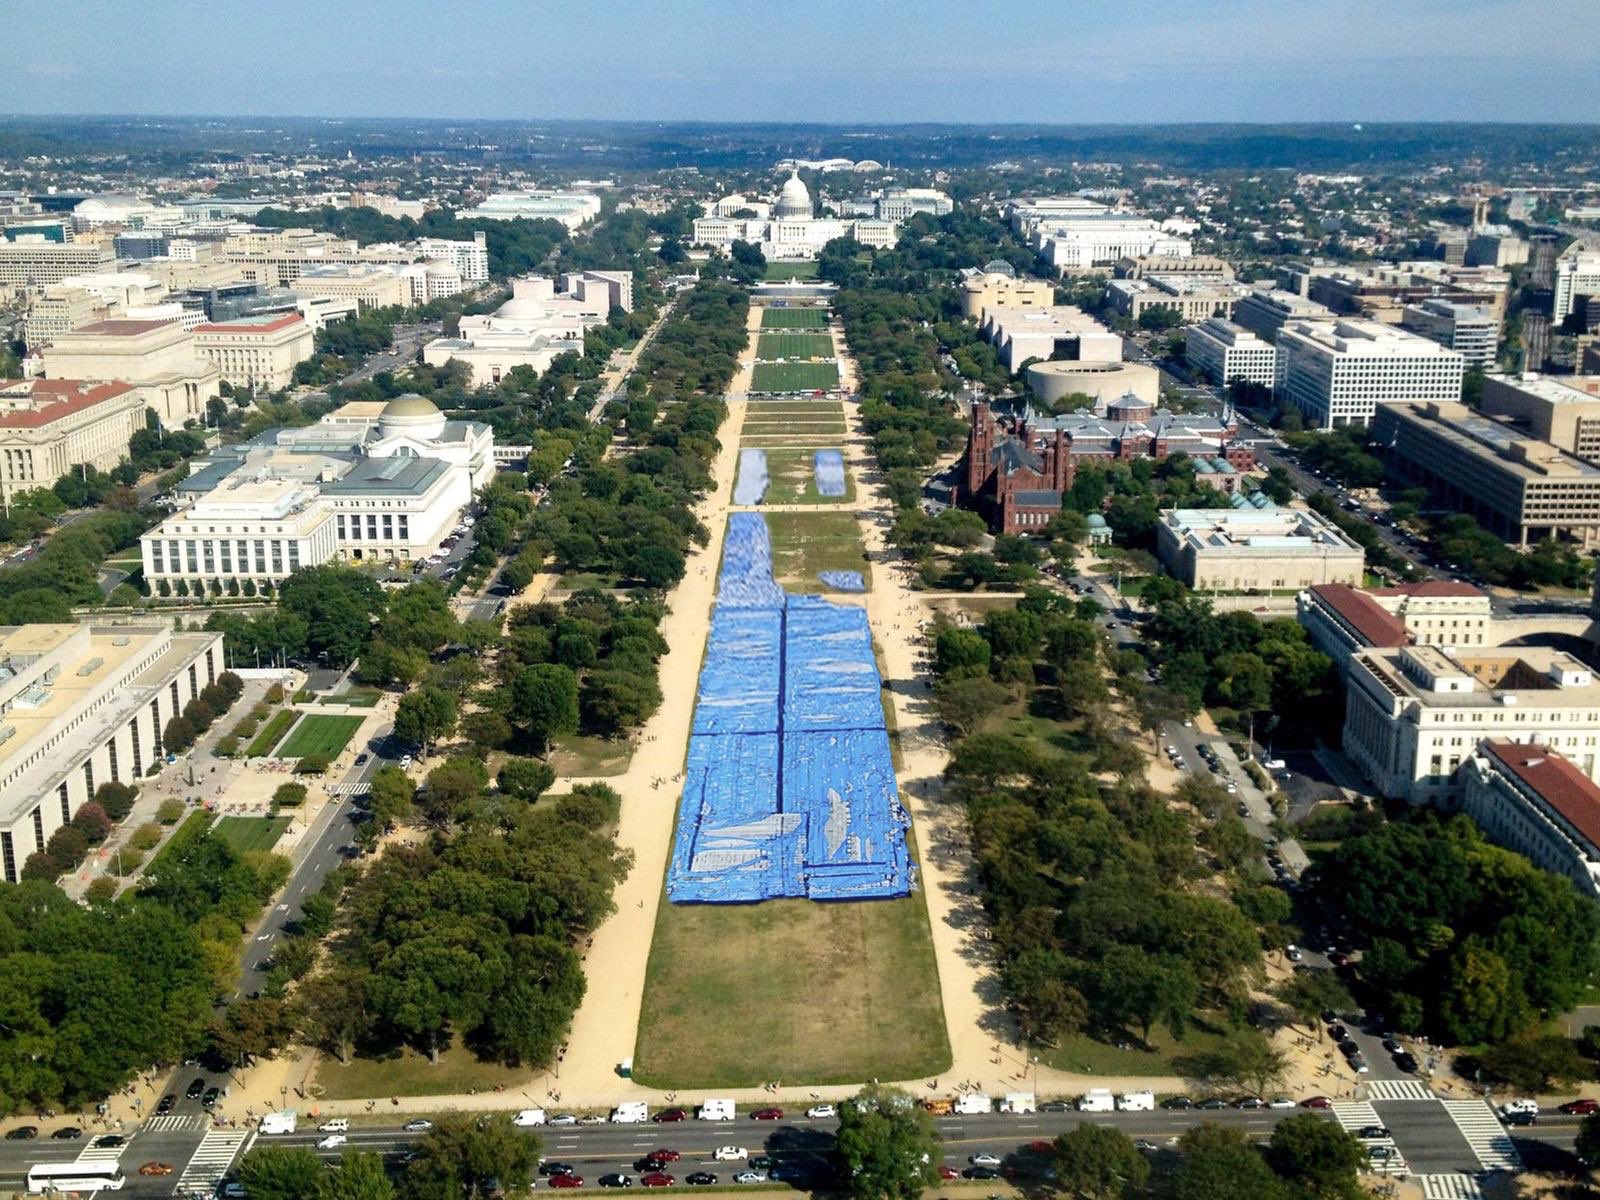 Photomontage of aerial view of National Mall with tarps laid on lawn